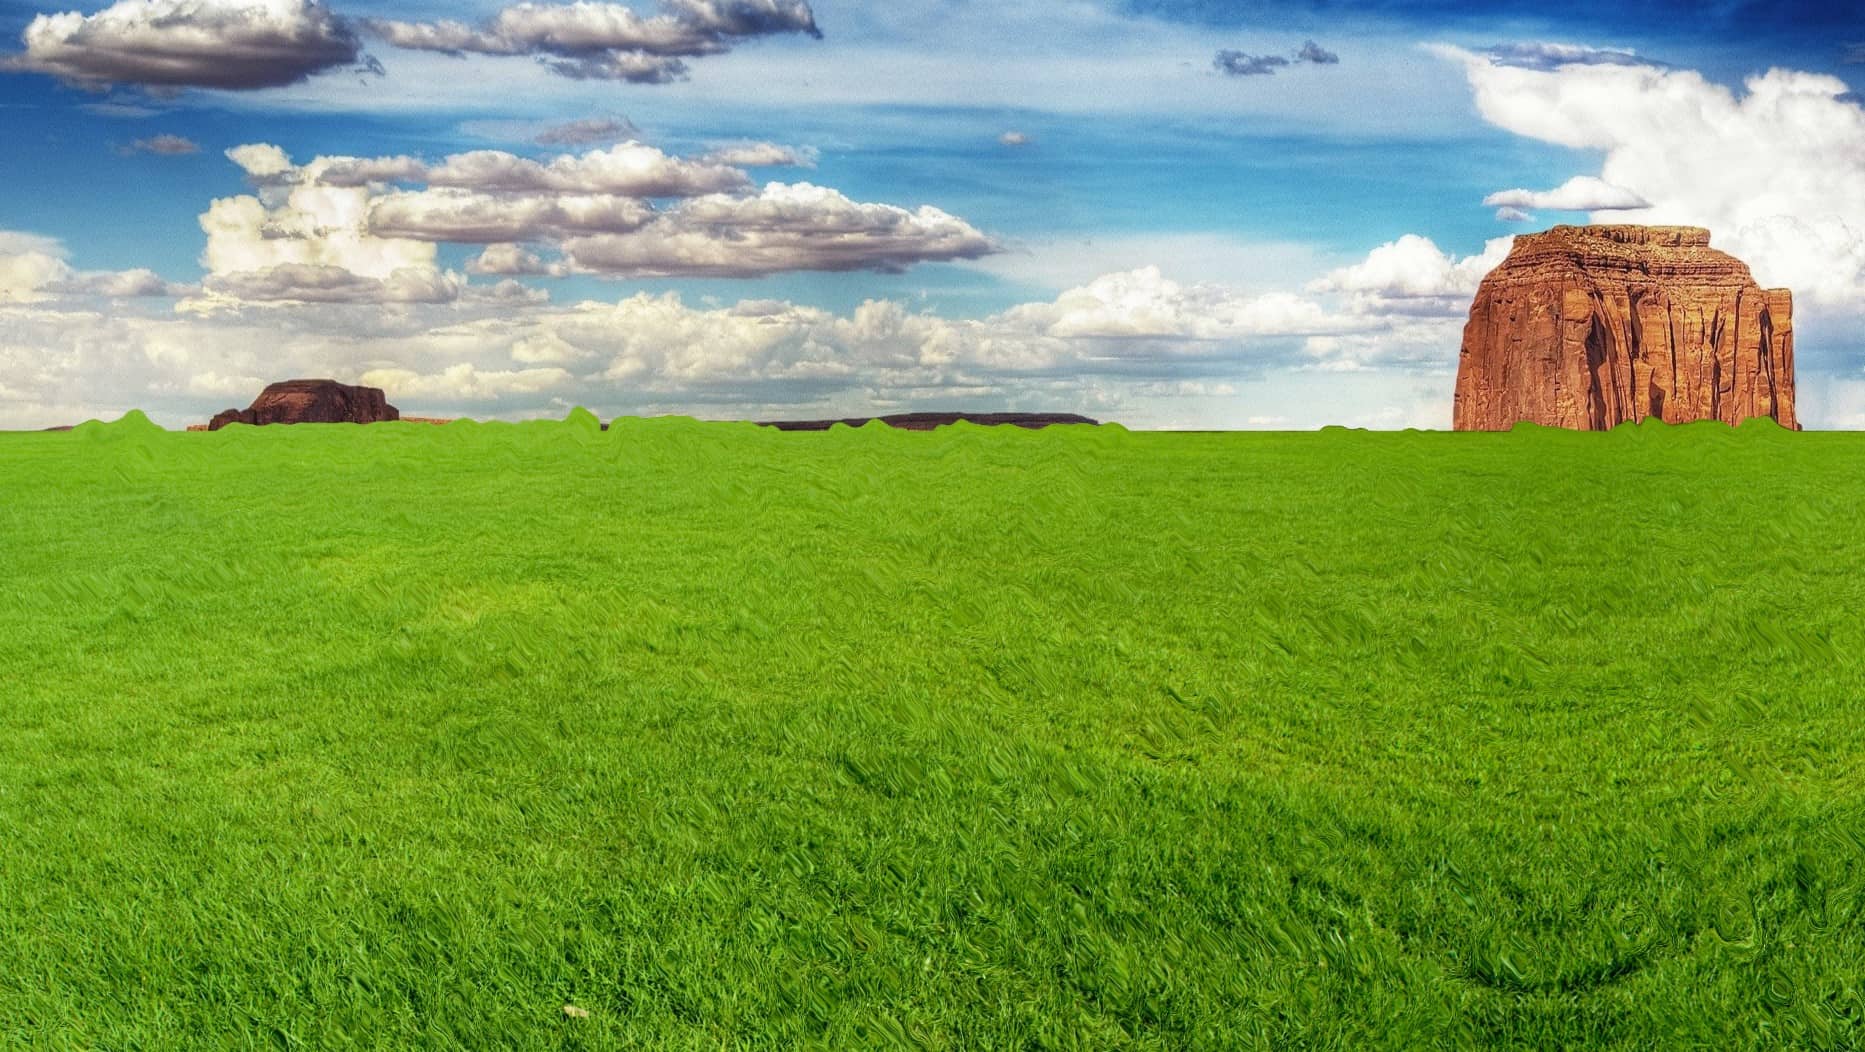 How To Make A Grass Field In Photoshop